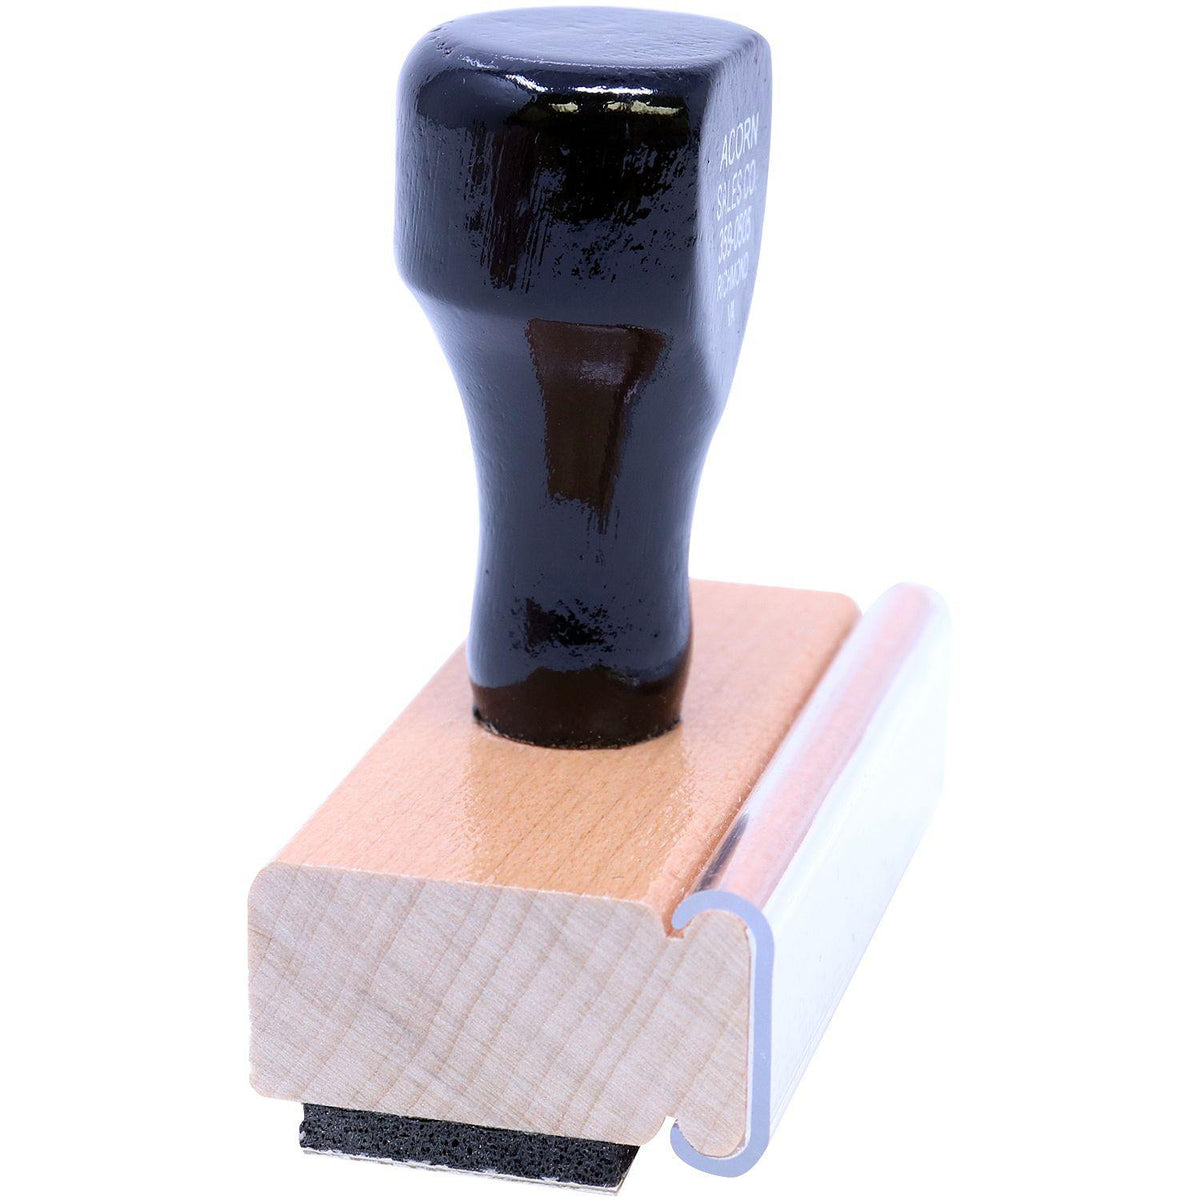 Narrow Bold Past Due Rubber Stamp - Engineer Seal Stamps - Brand_Acorn, Impression Size_Small, Stamp Type_Regular Stamp, Type of Use_Finance, Type of Use_Office